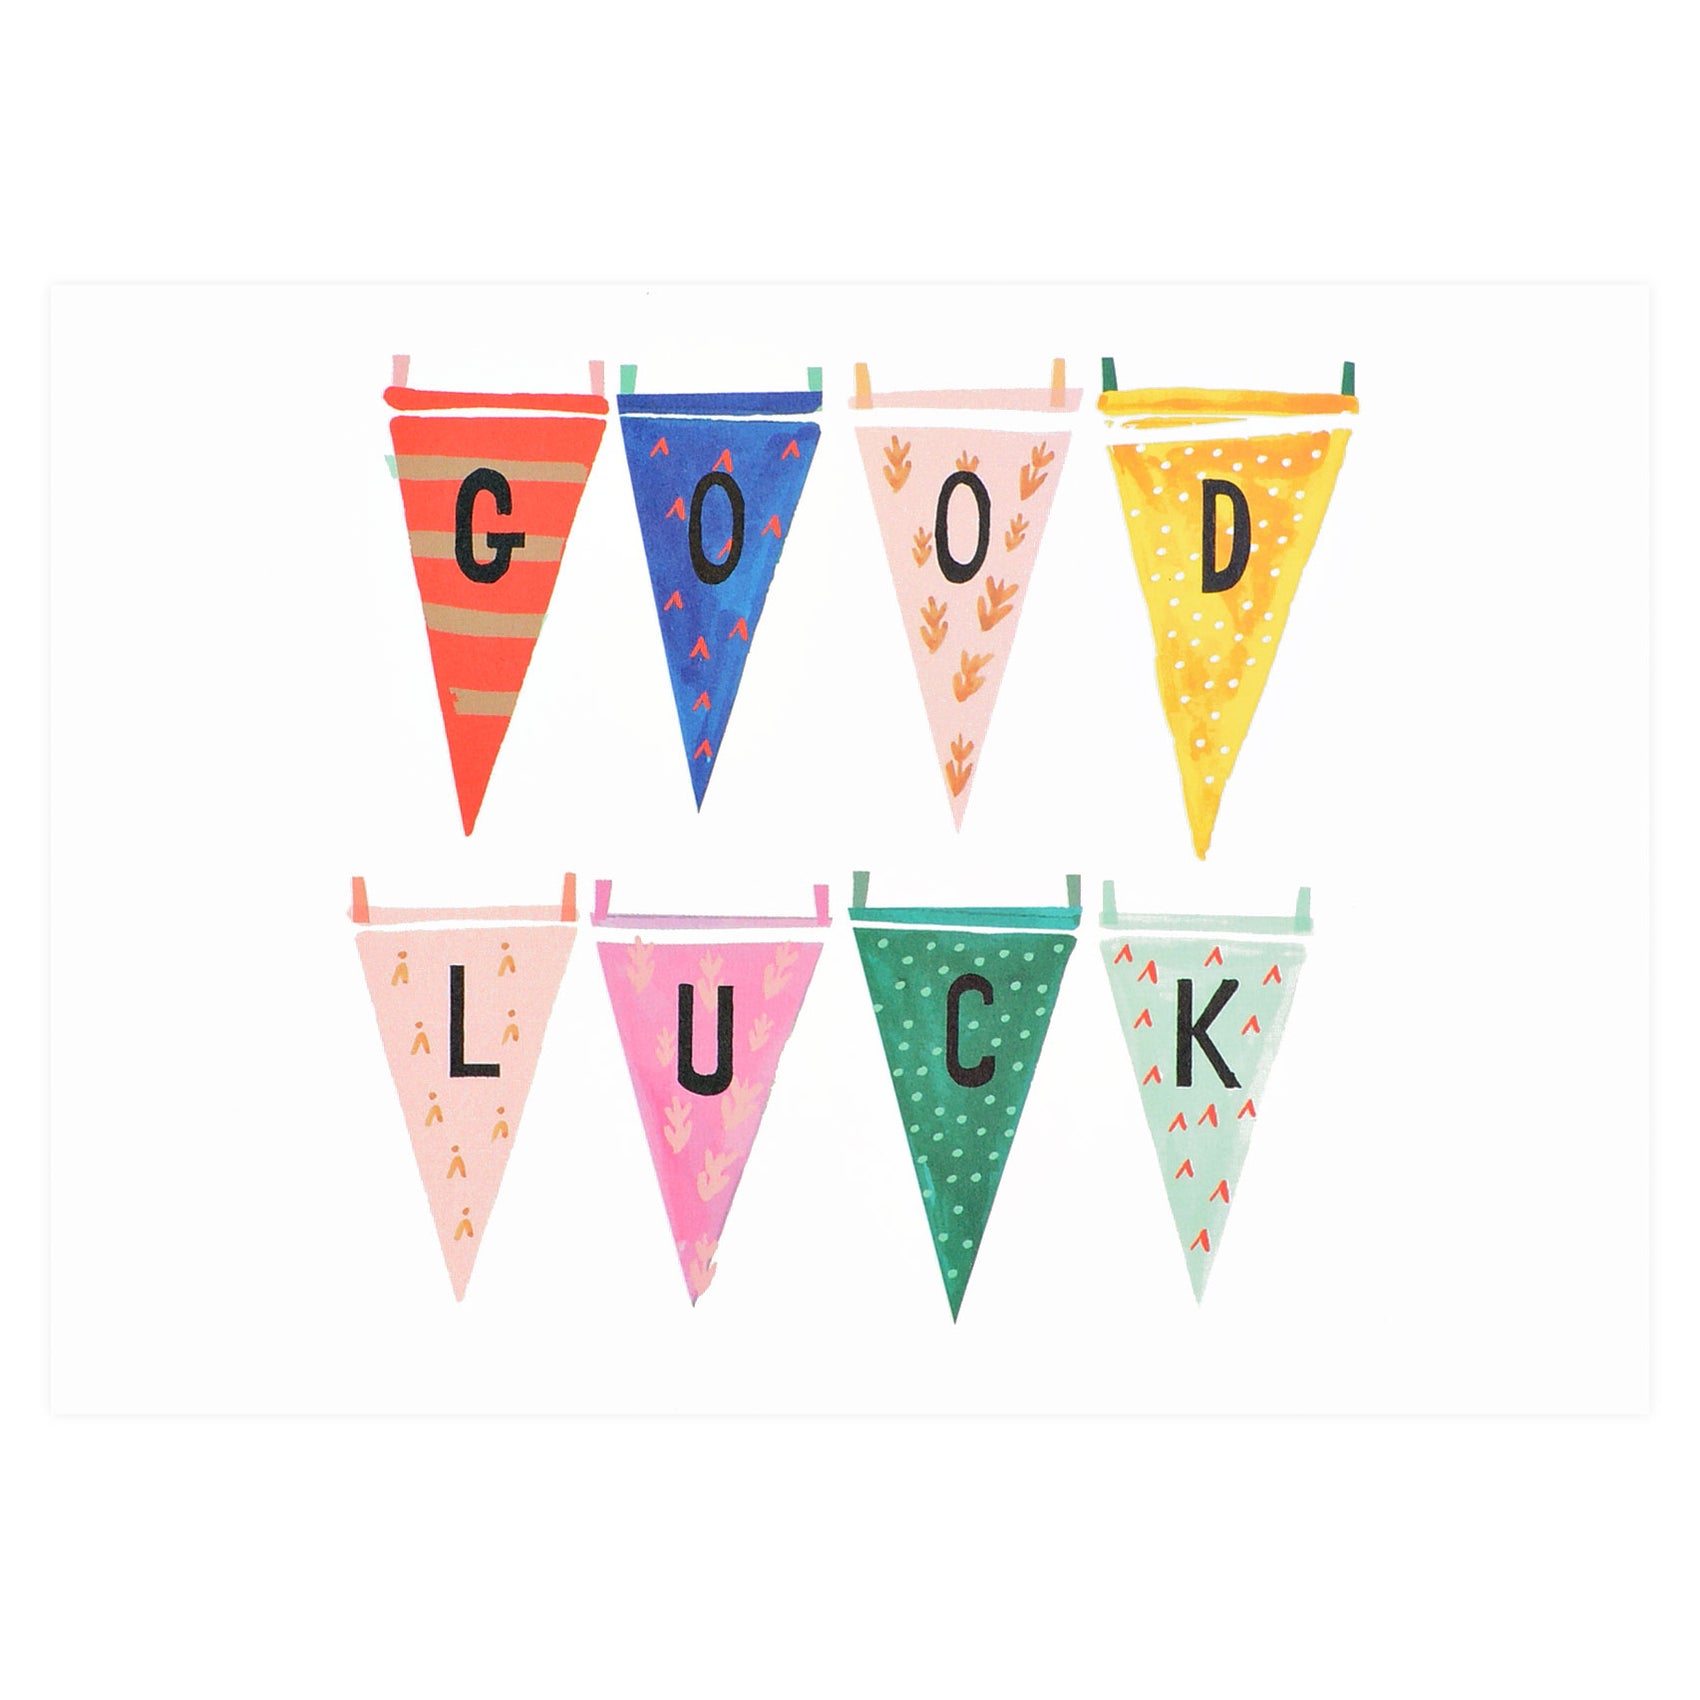 Cheering With Pennants Greeting Card